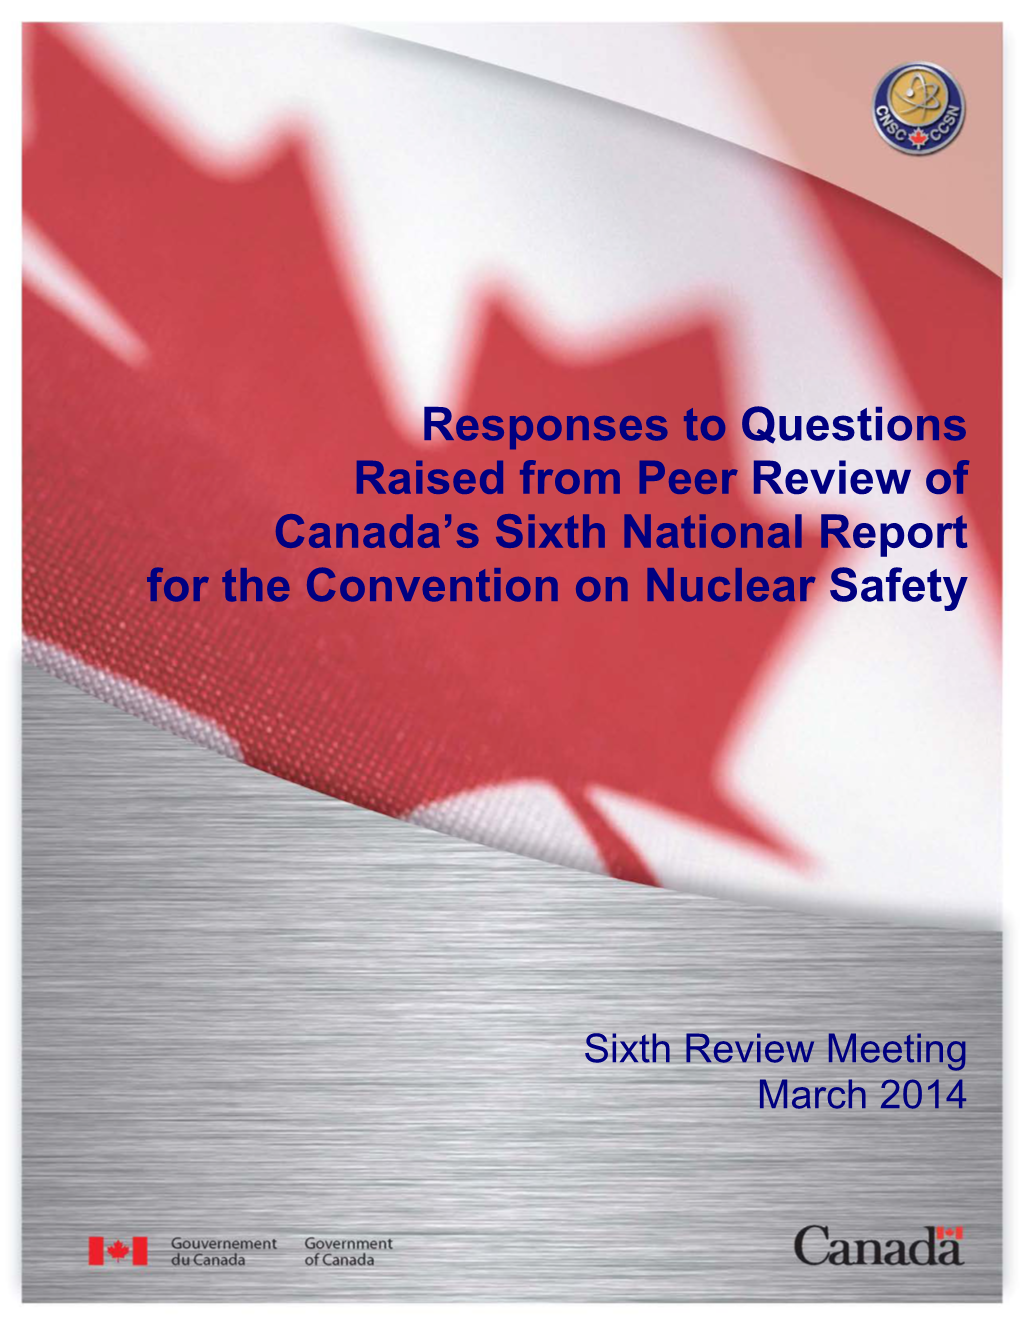 Responses to Questions Raised from Peer Review of Canada's Sixth